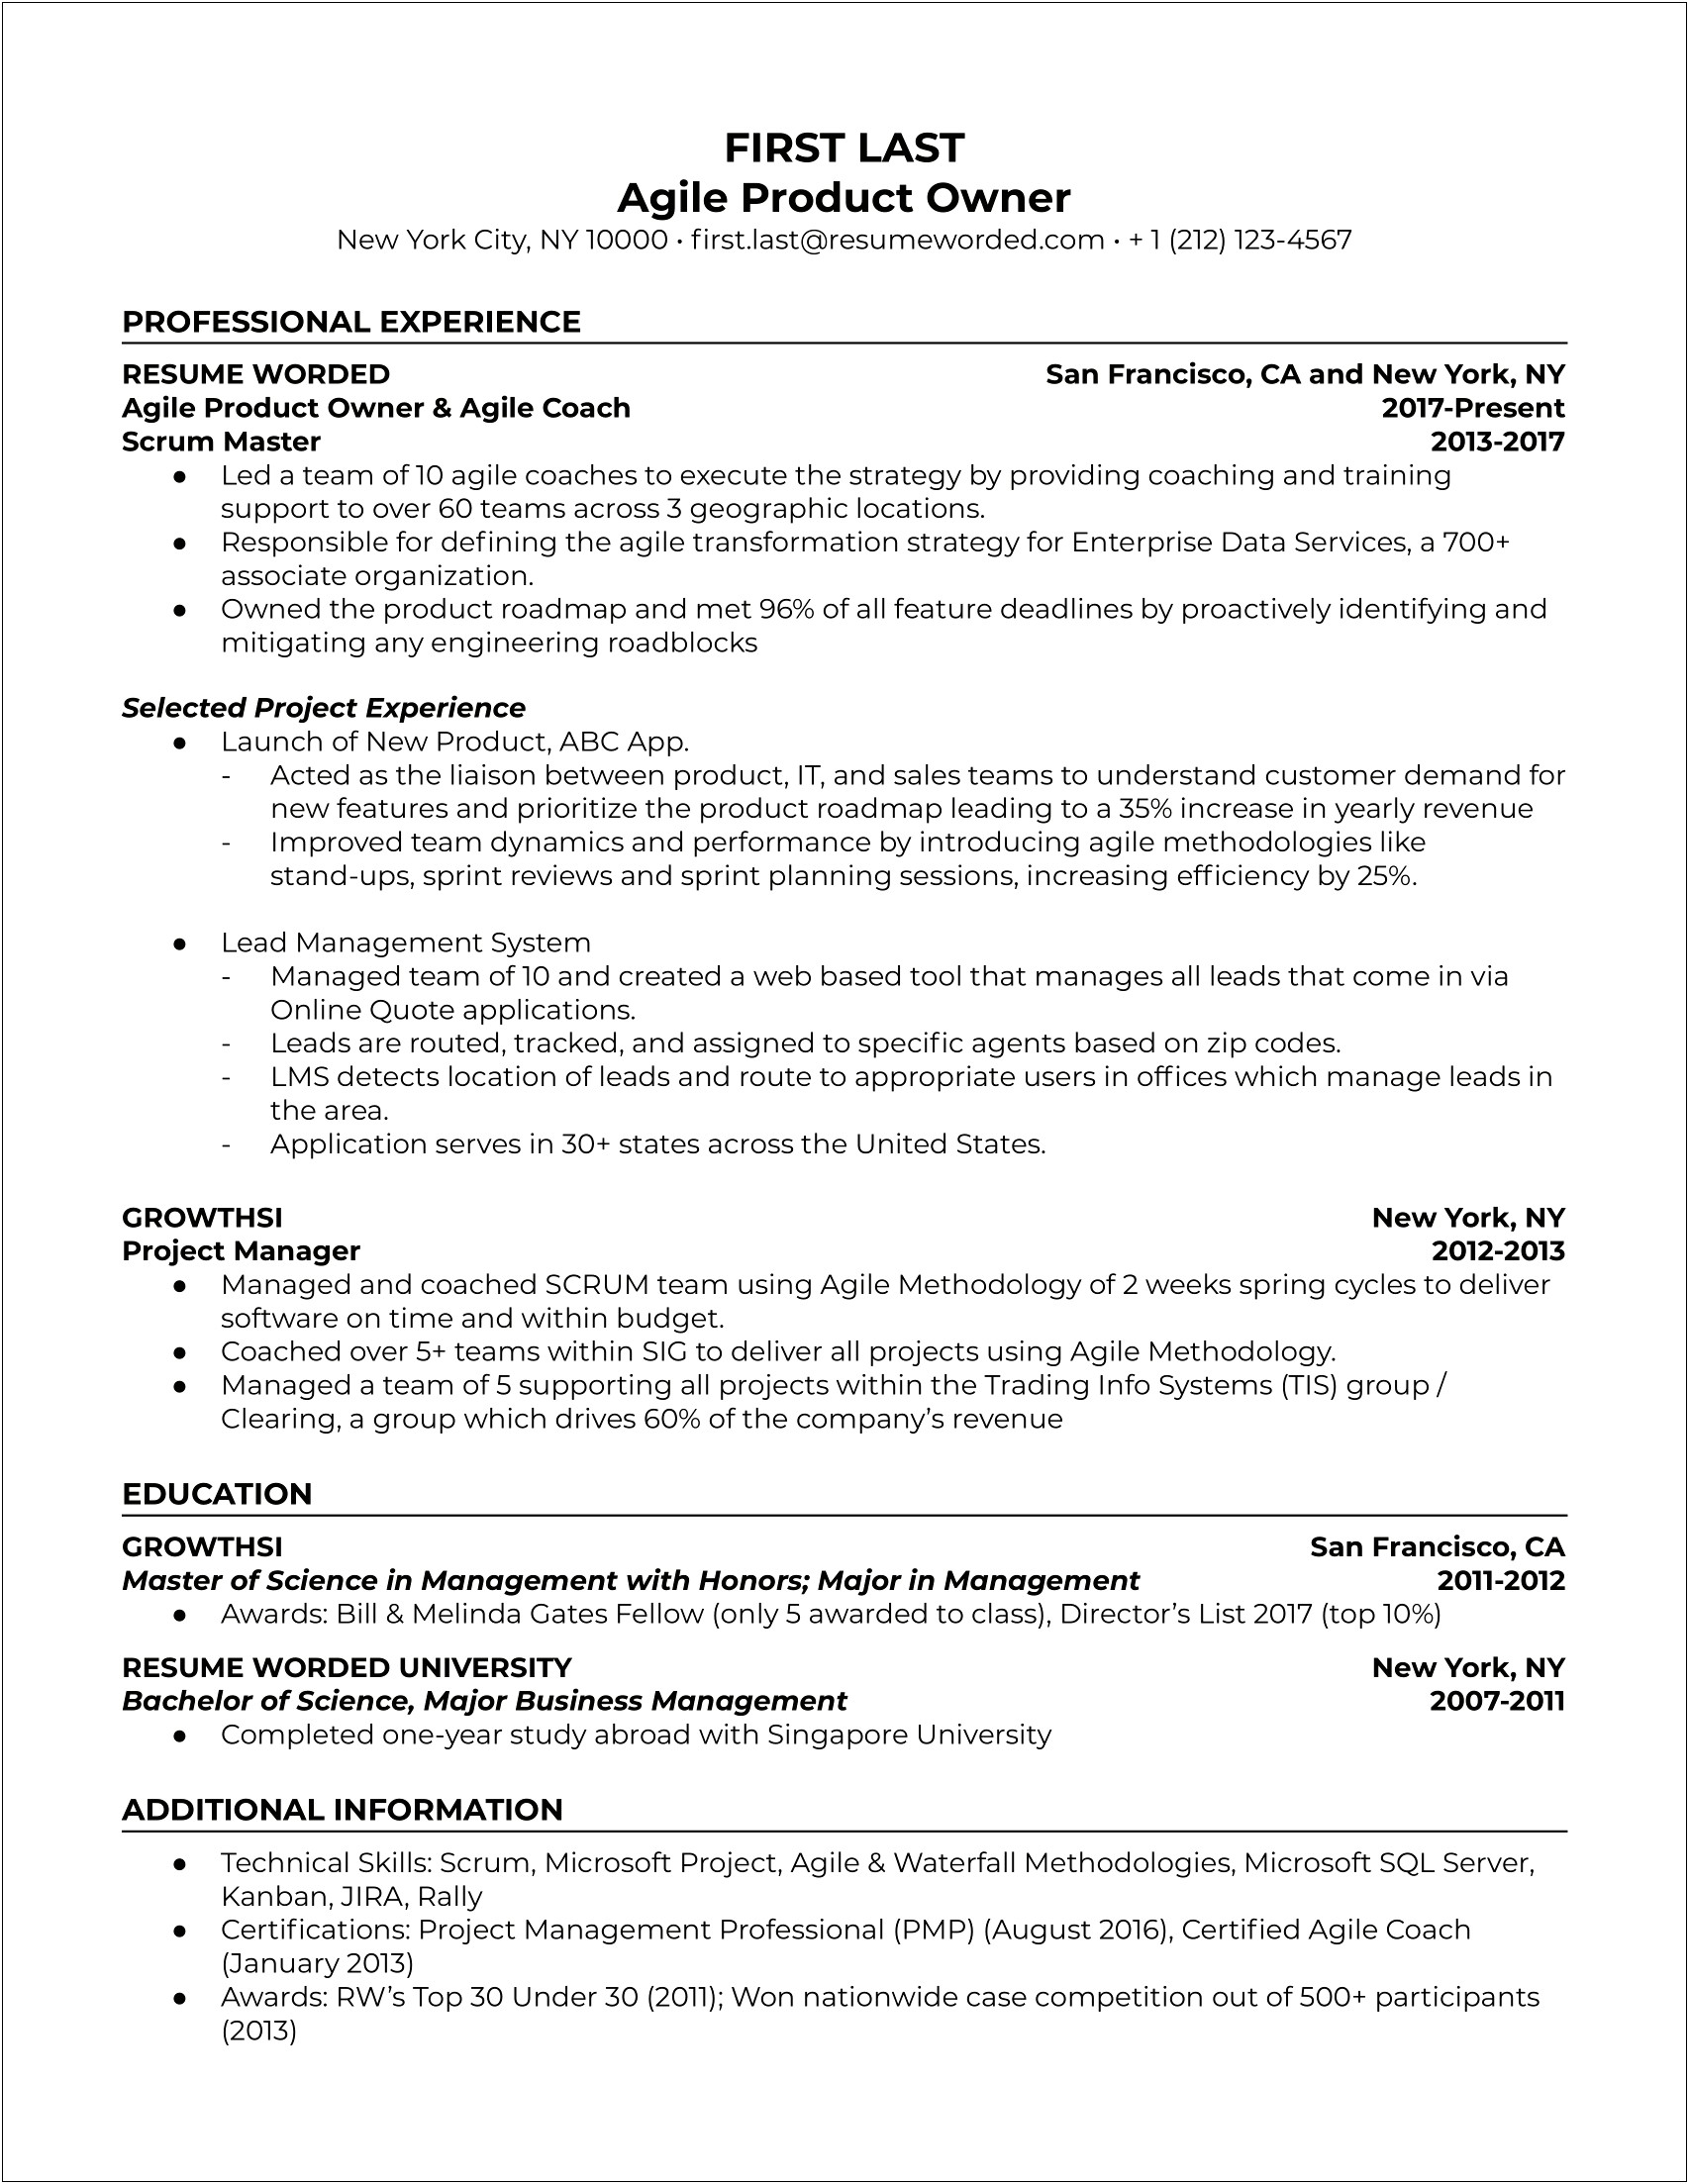 Example Resume Of A Business Owner